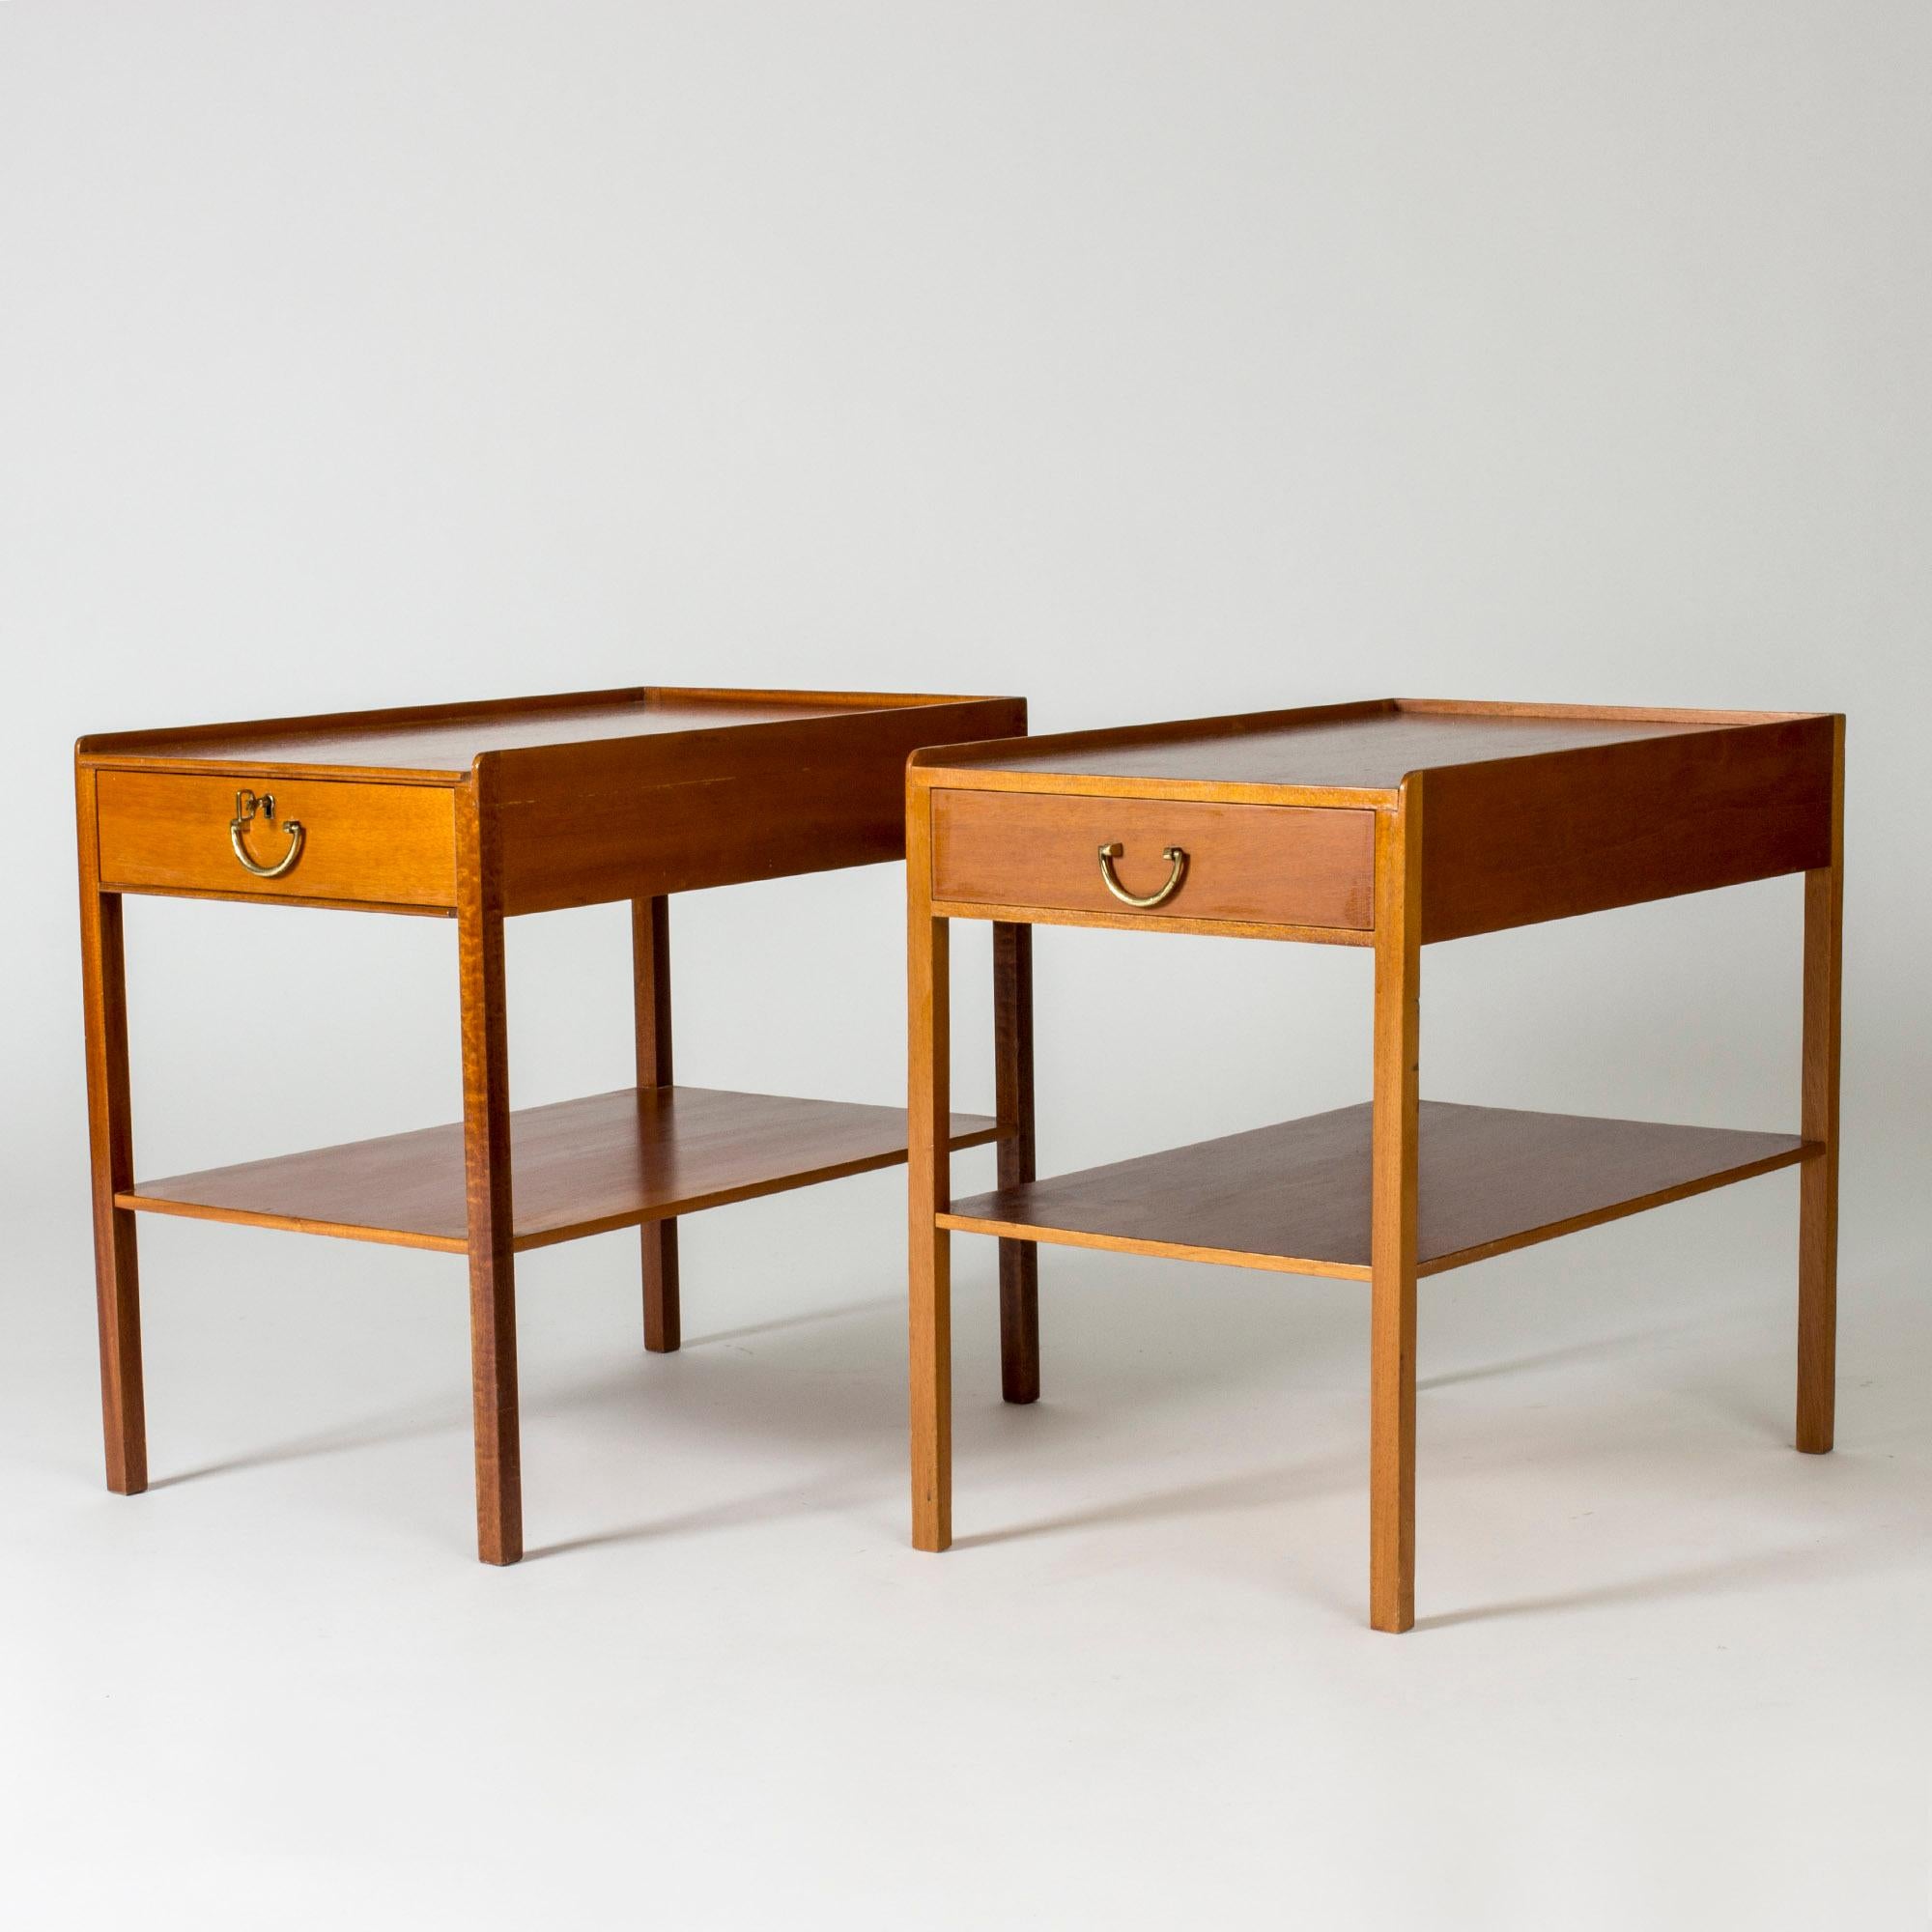 Pair of elegant bedside or side tables by Josef Frank, made in mahogany. Clean, slender lines, single drawers and neat brass handles.